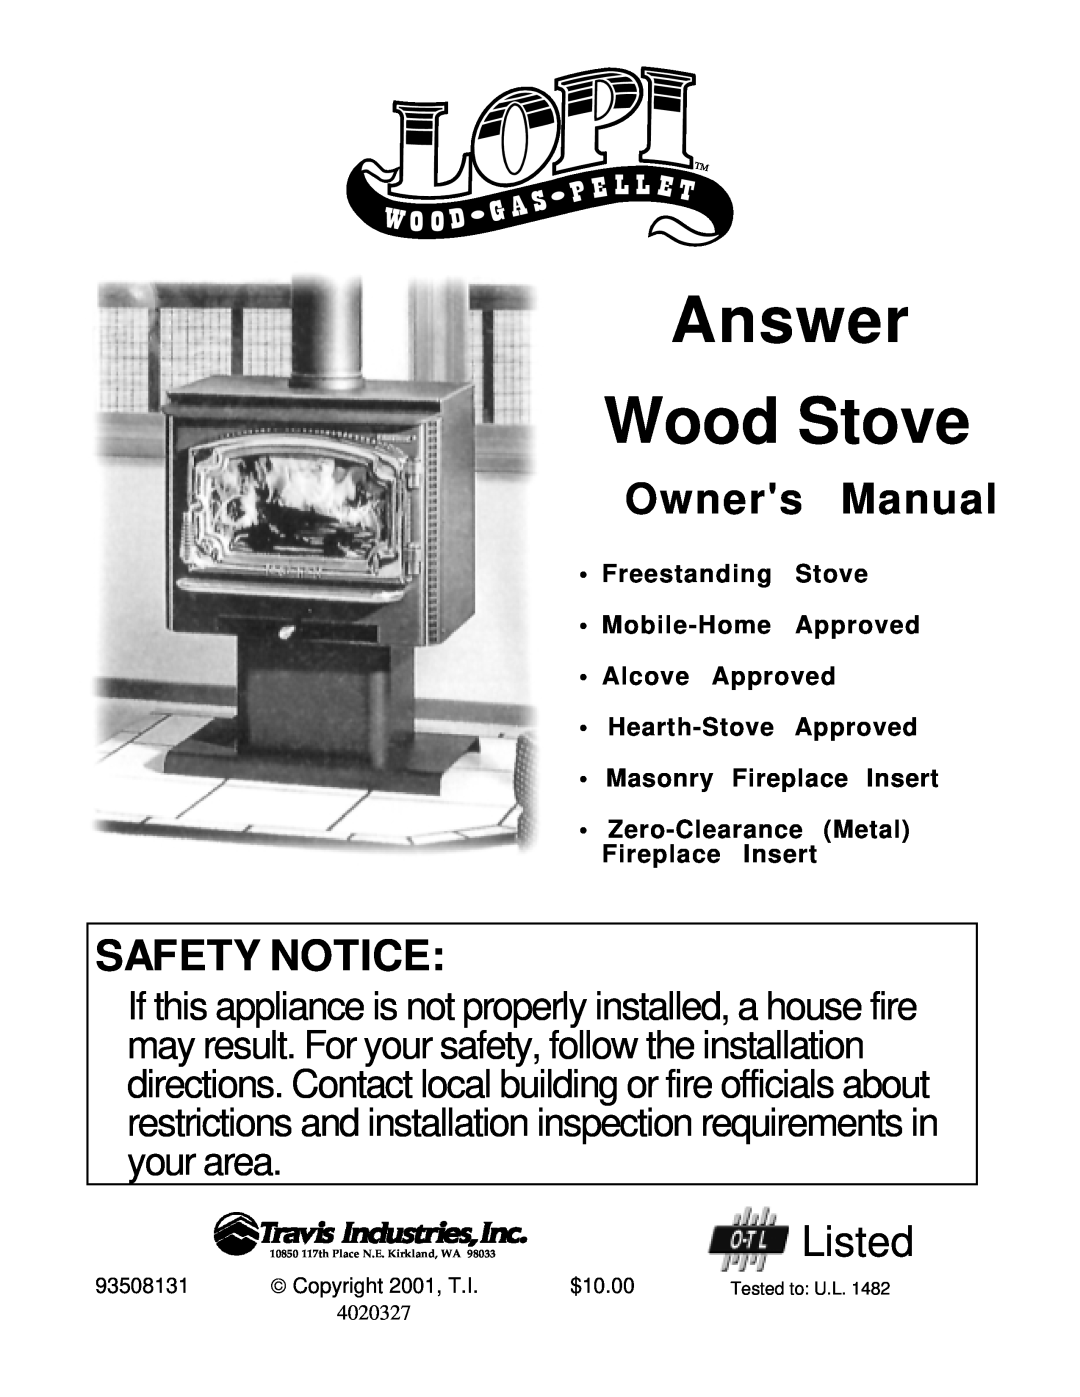 Lopi Answer Wood Stove owner manual Safety Notice, Listed 